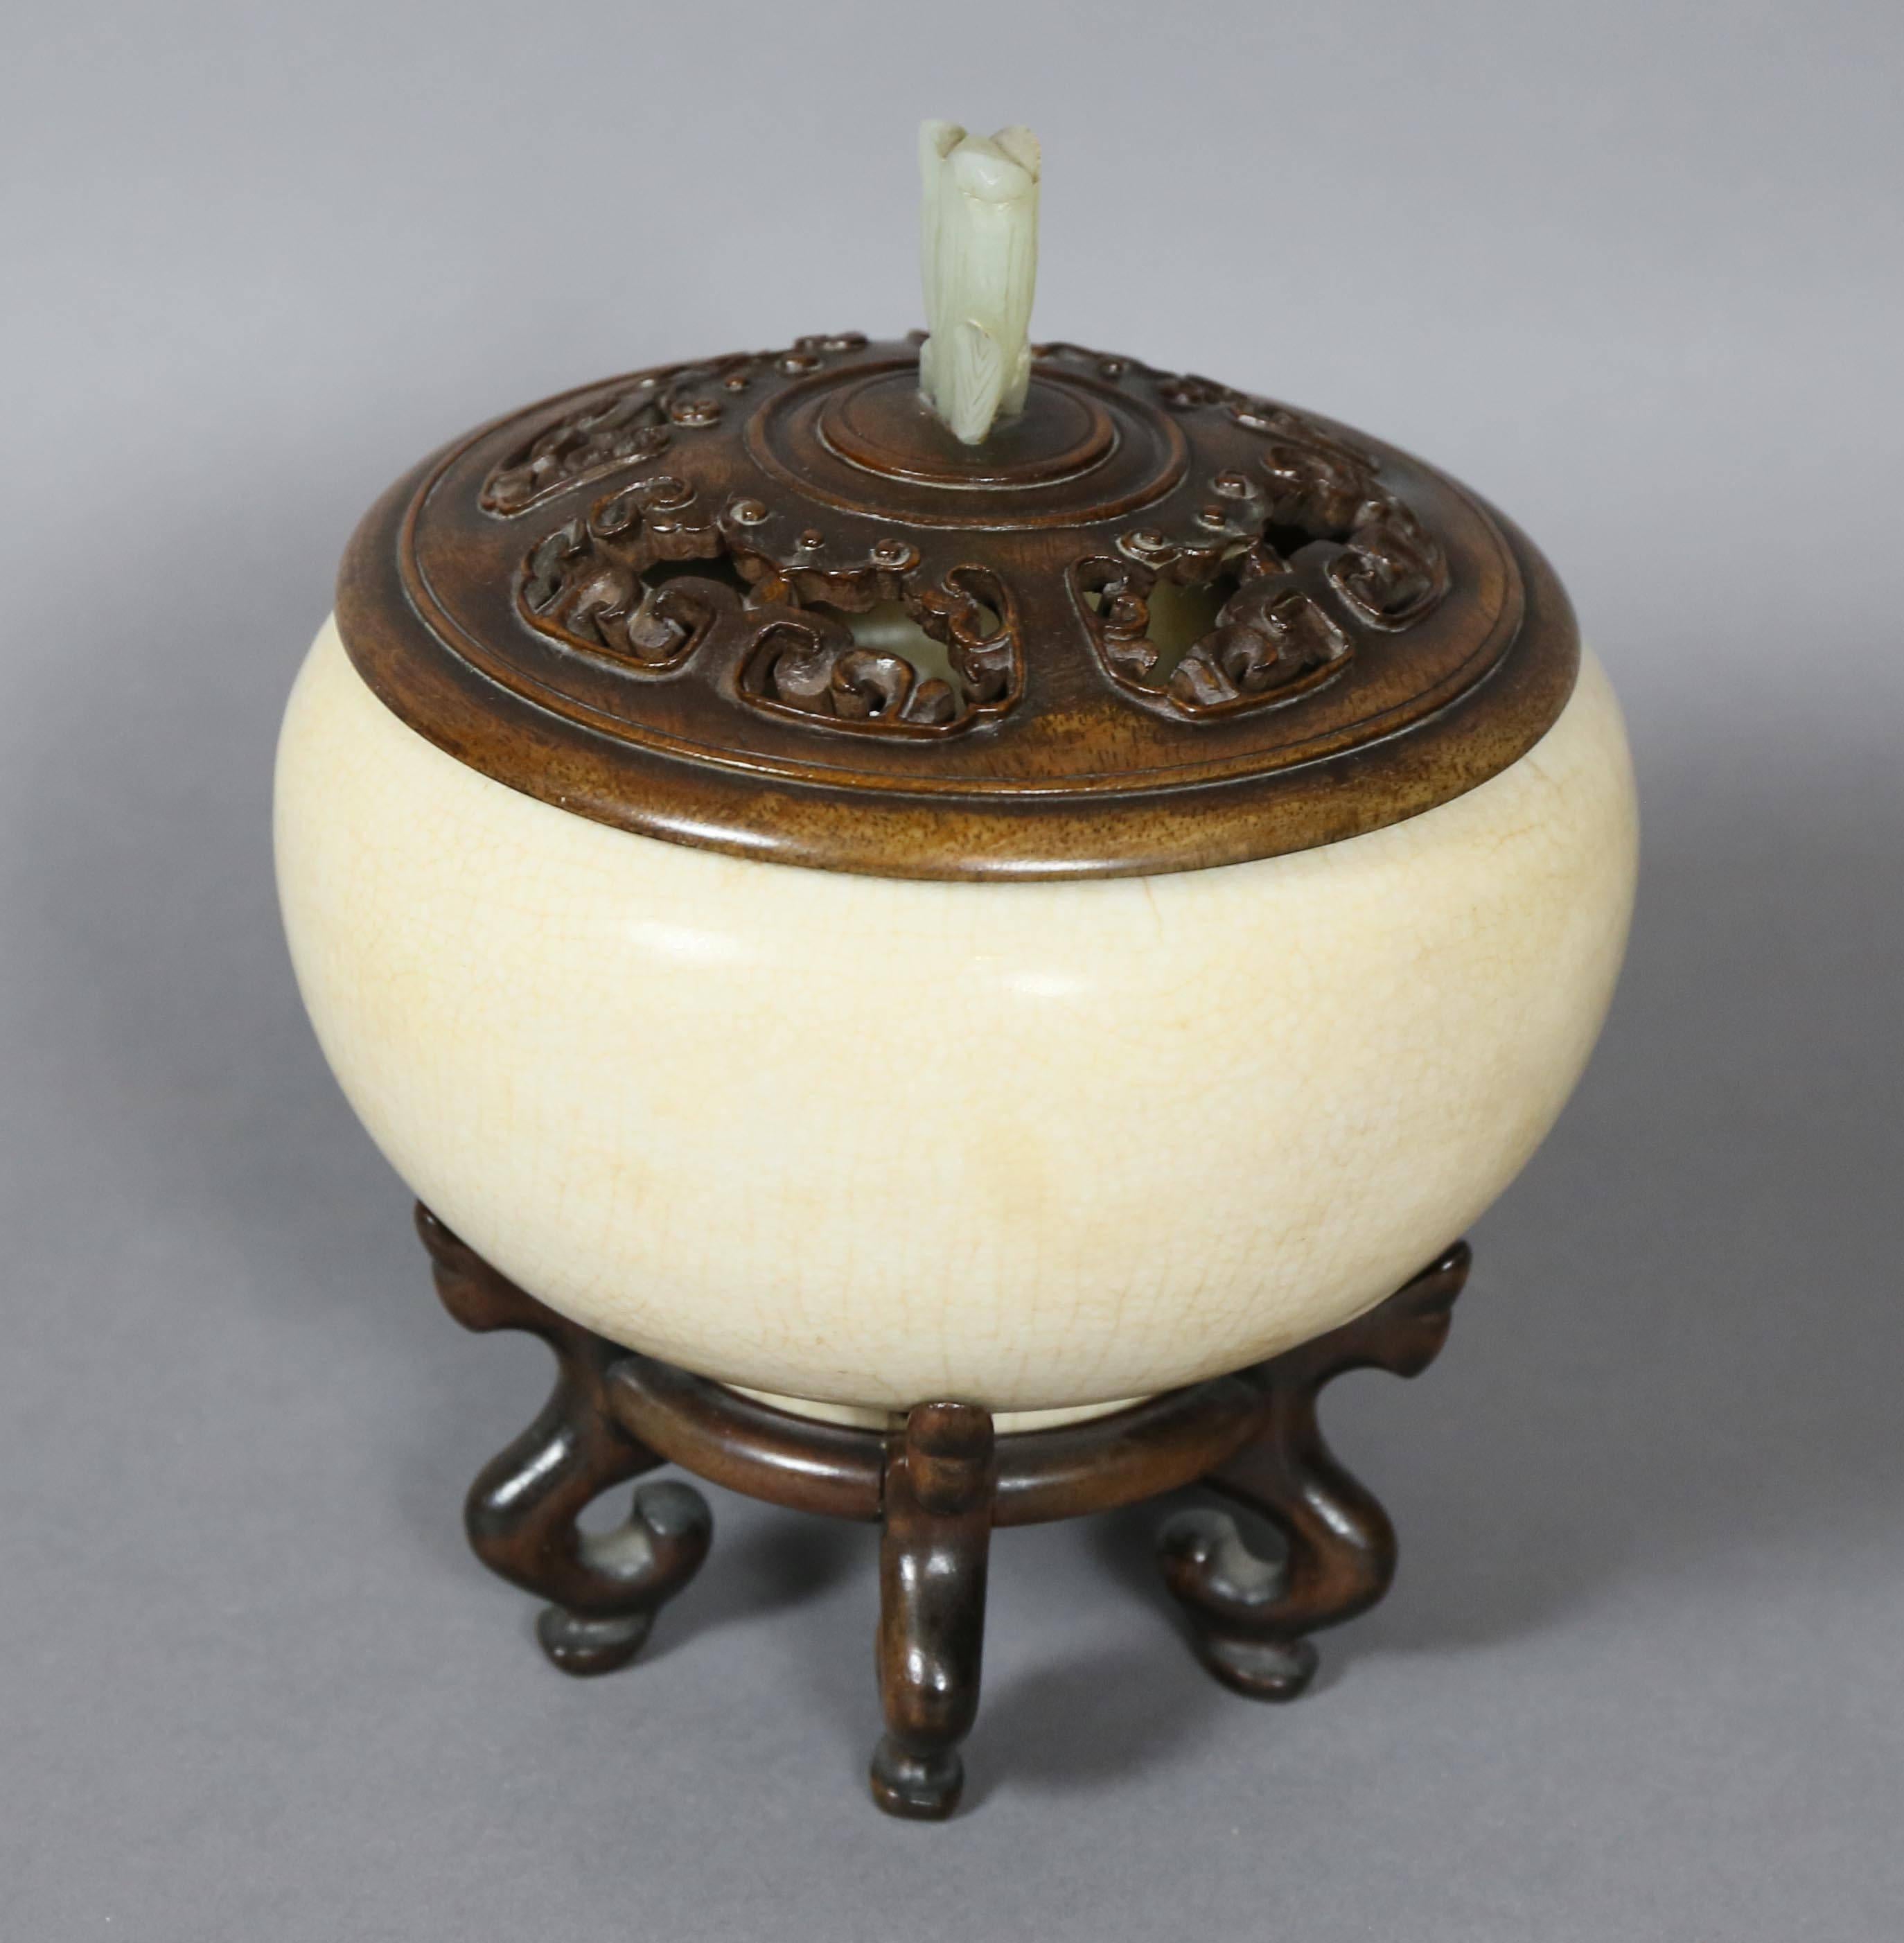 With pierced finely carved wood lid with jade finial, globular shaped heavily potted bowl on a wood stand.